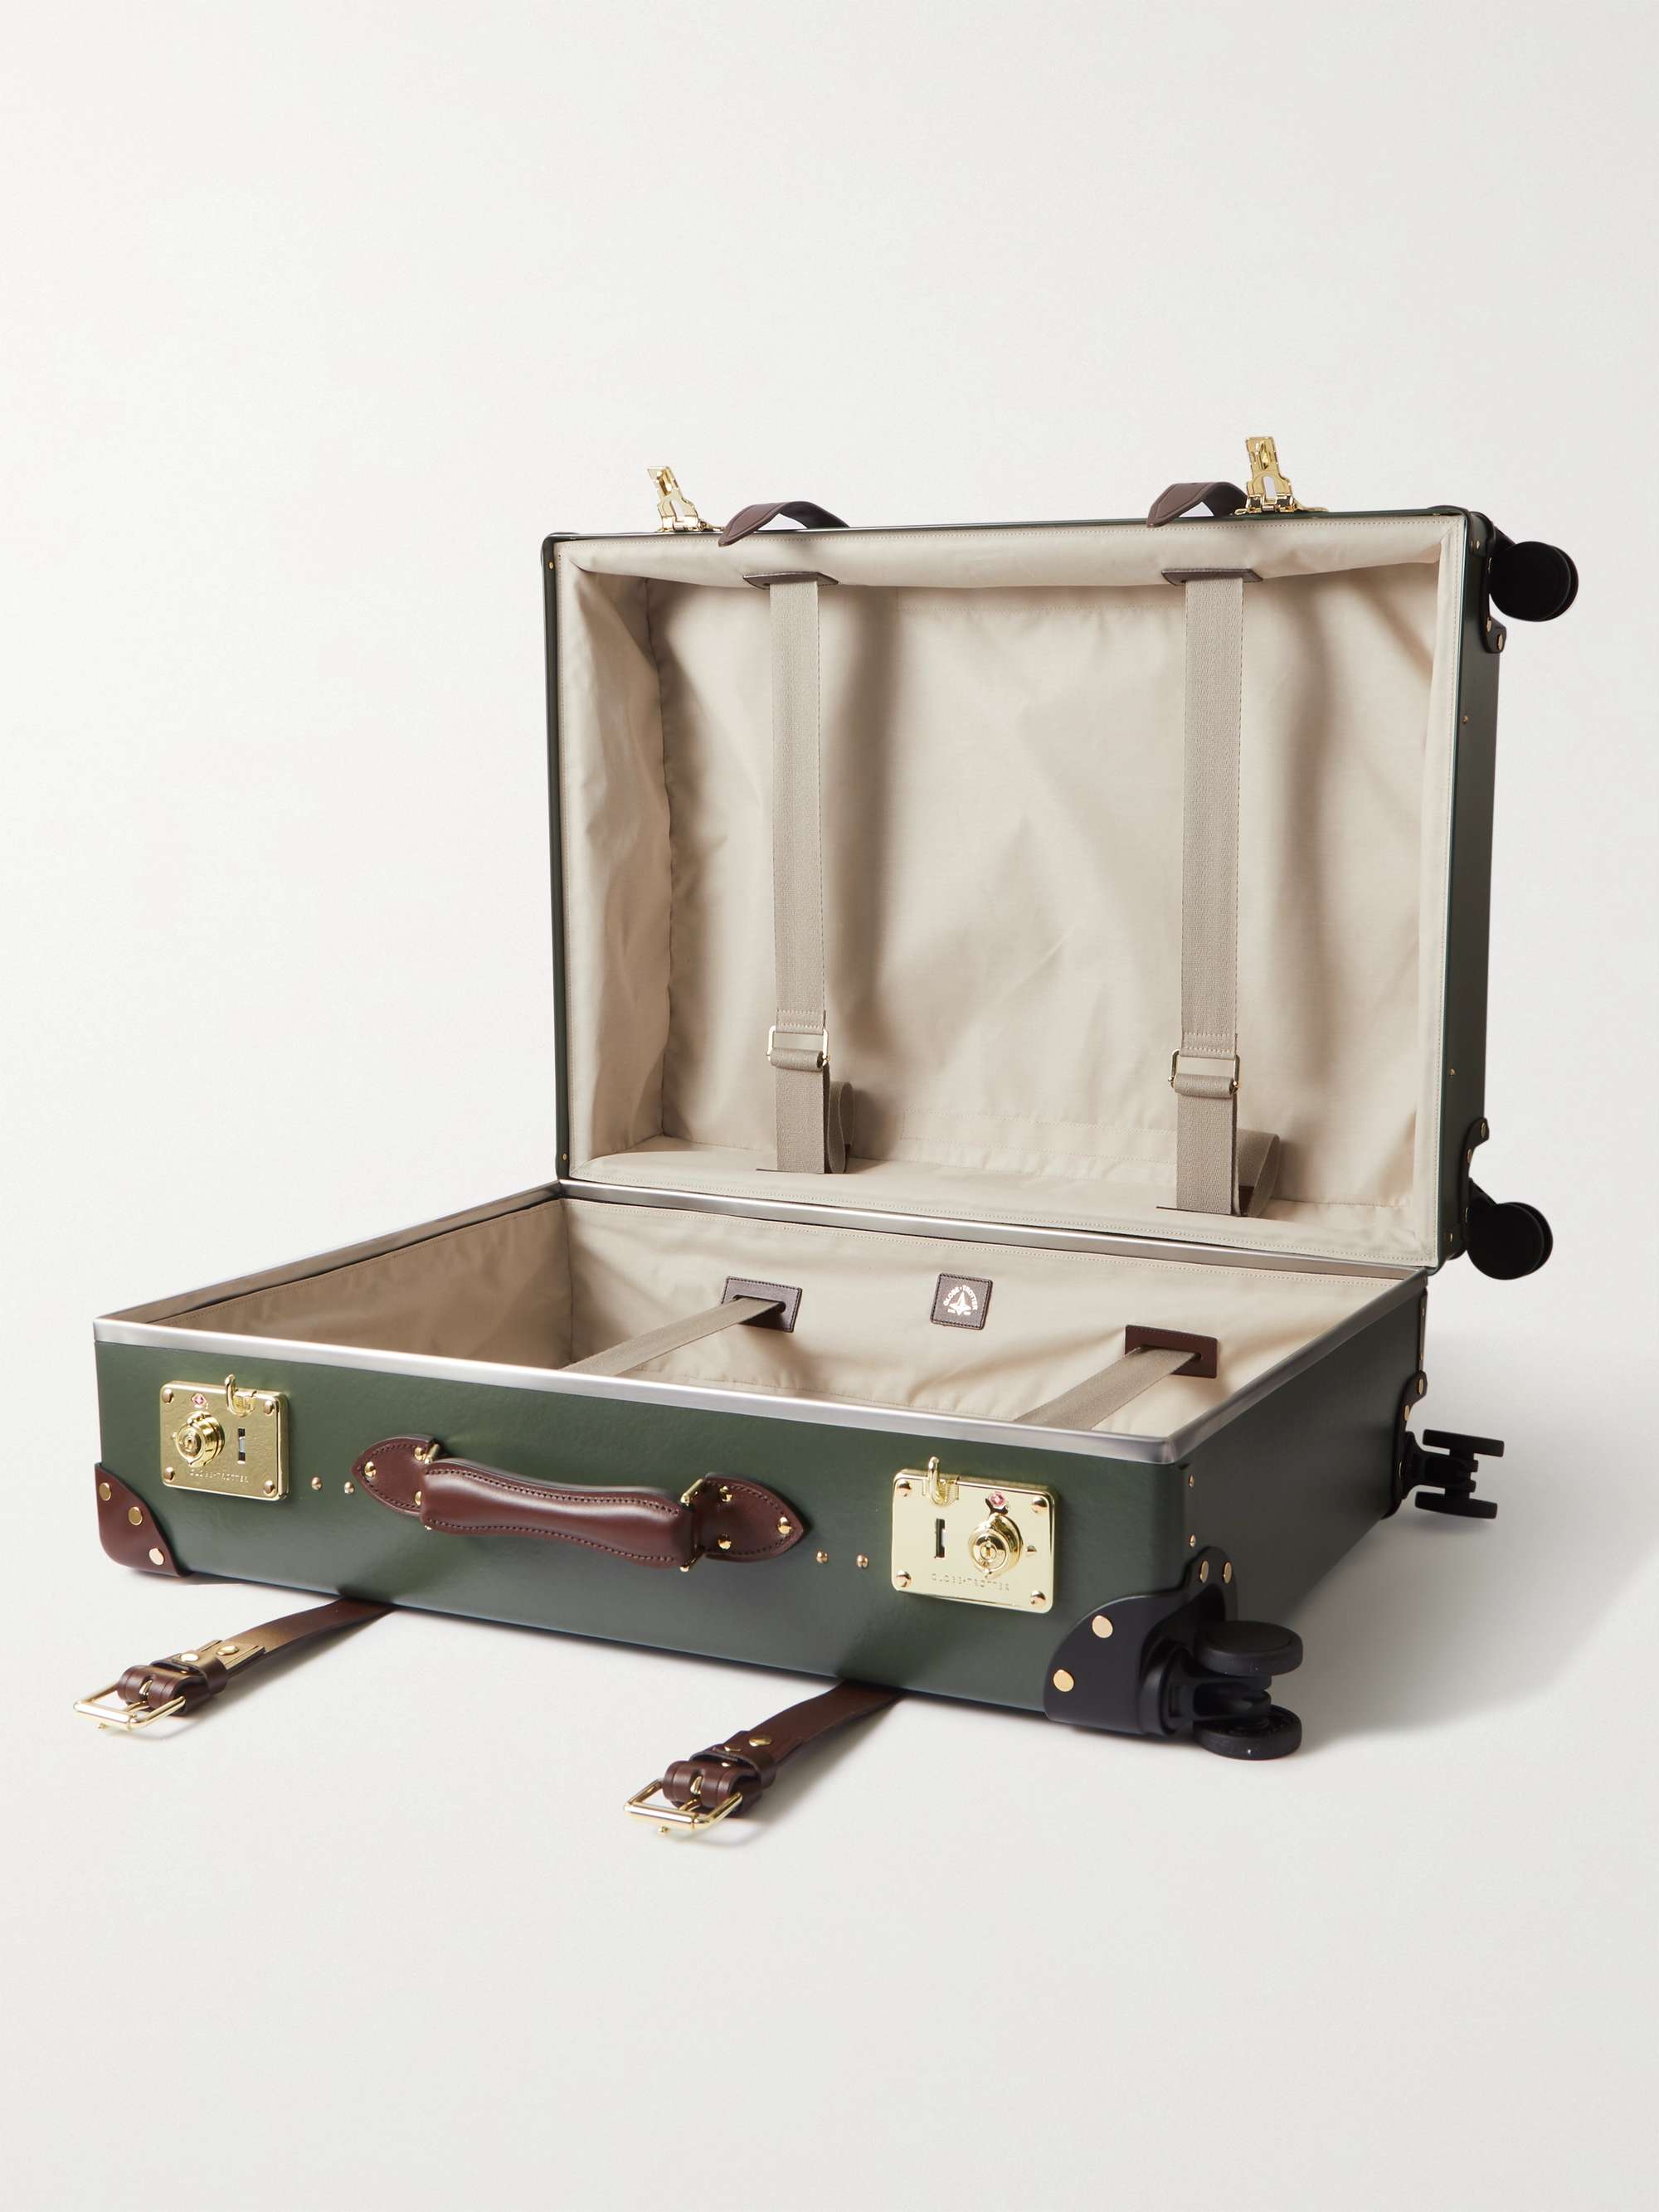 GLOBE-TROTTER Centenary 30" Leather-Trimmed Trolley Case